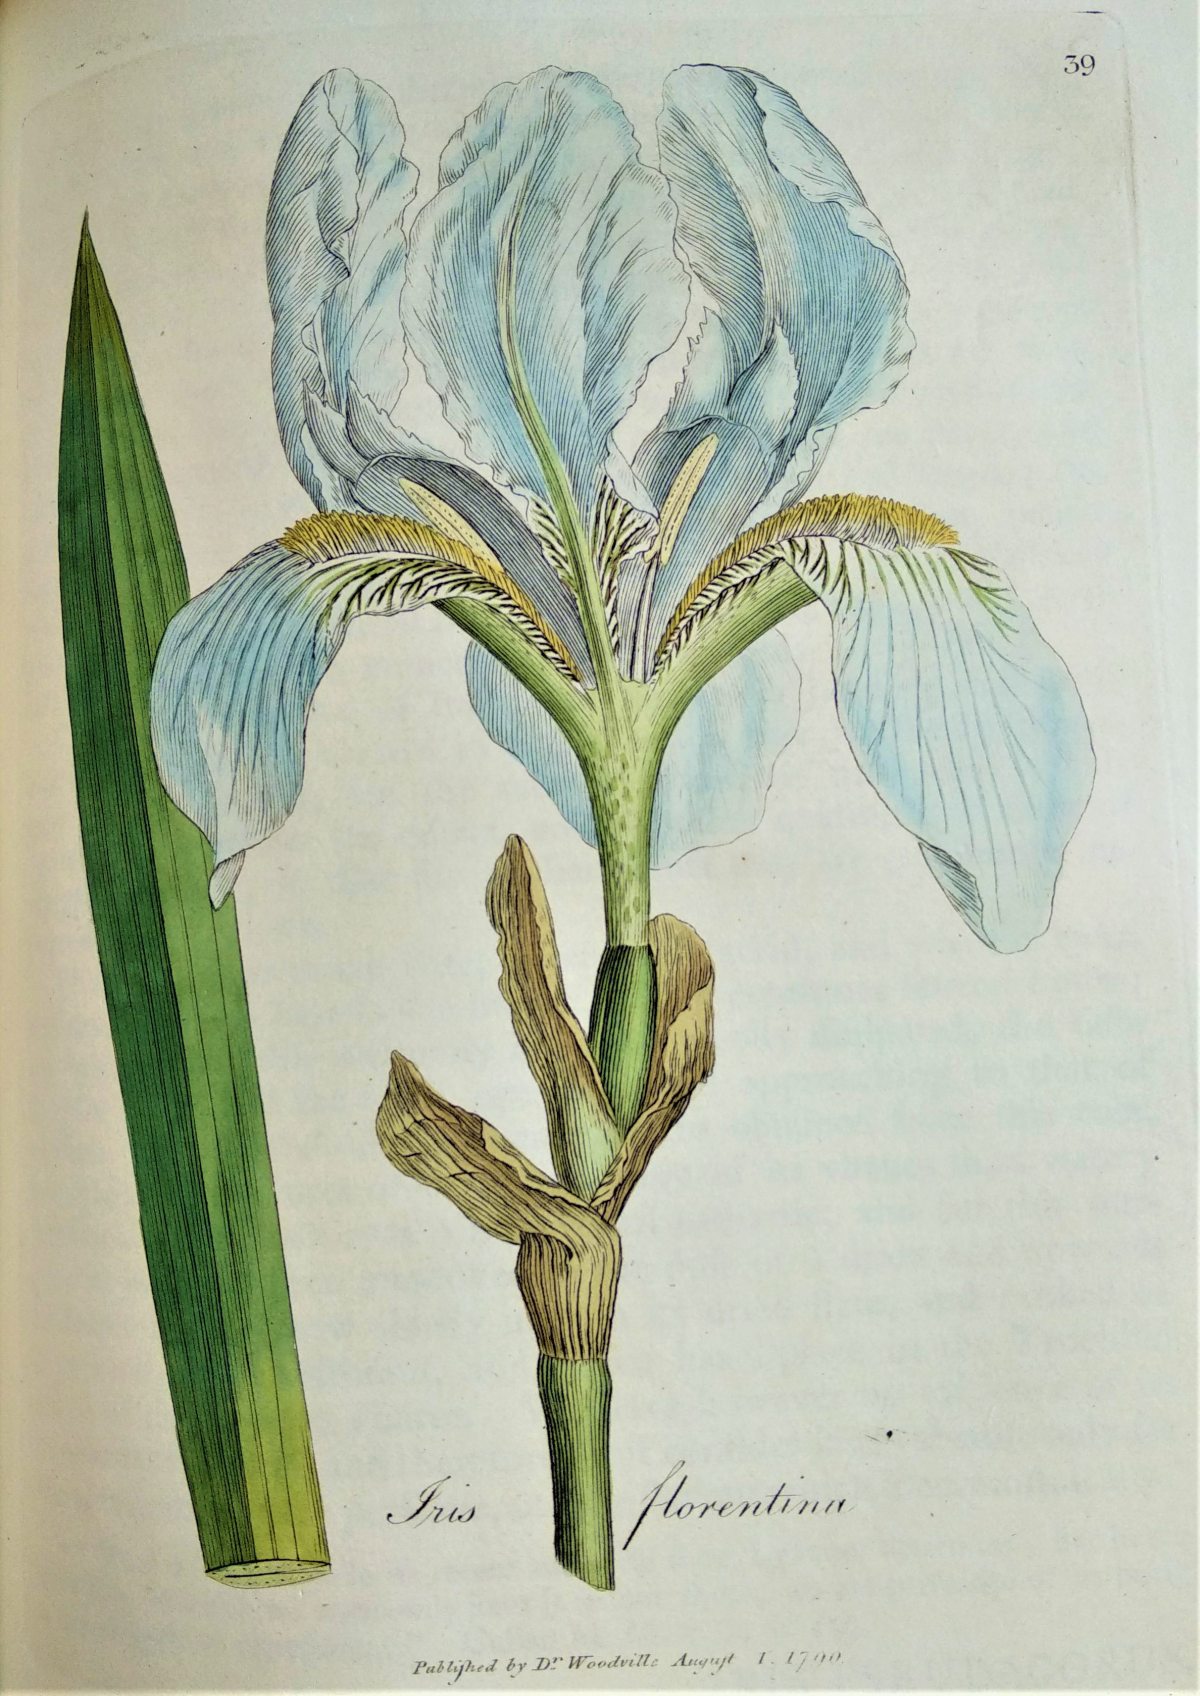 Brightly coloured illustration of the Florentine iris plant and flowers. 